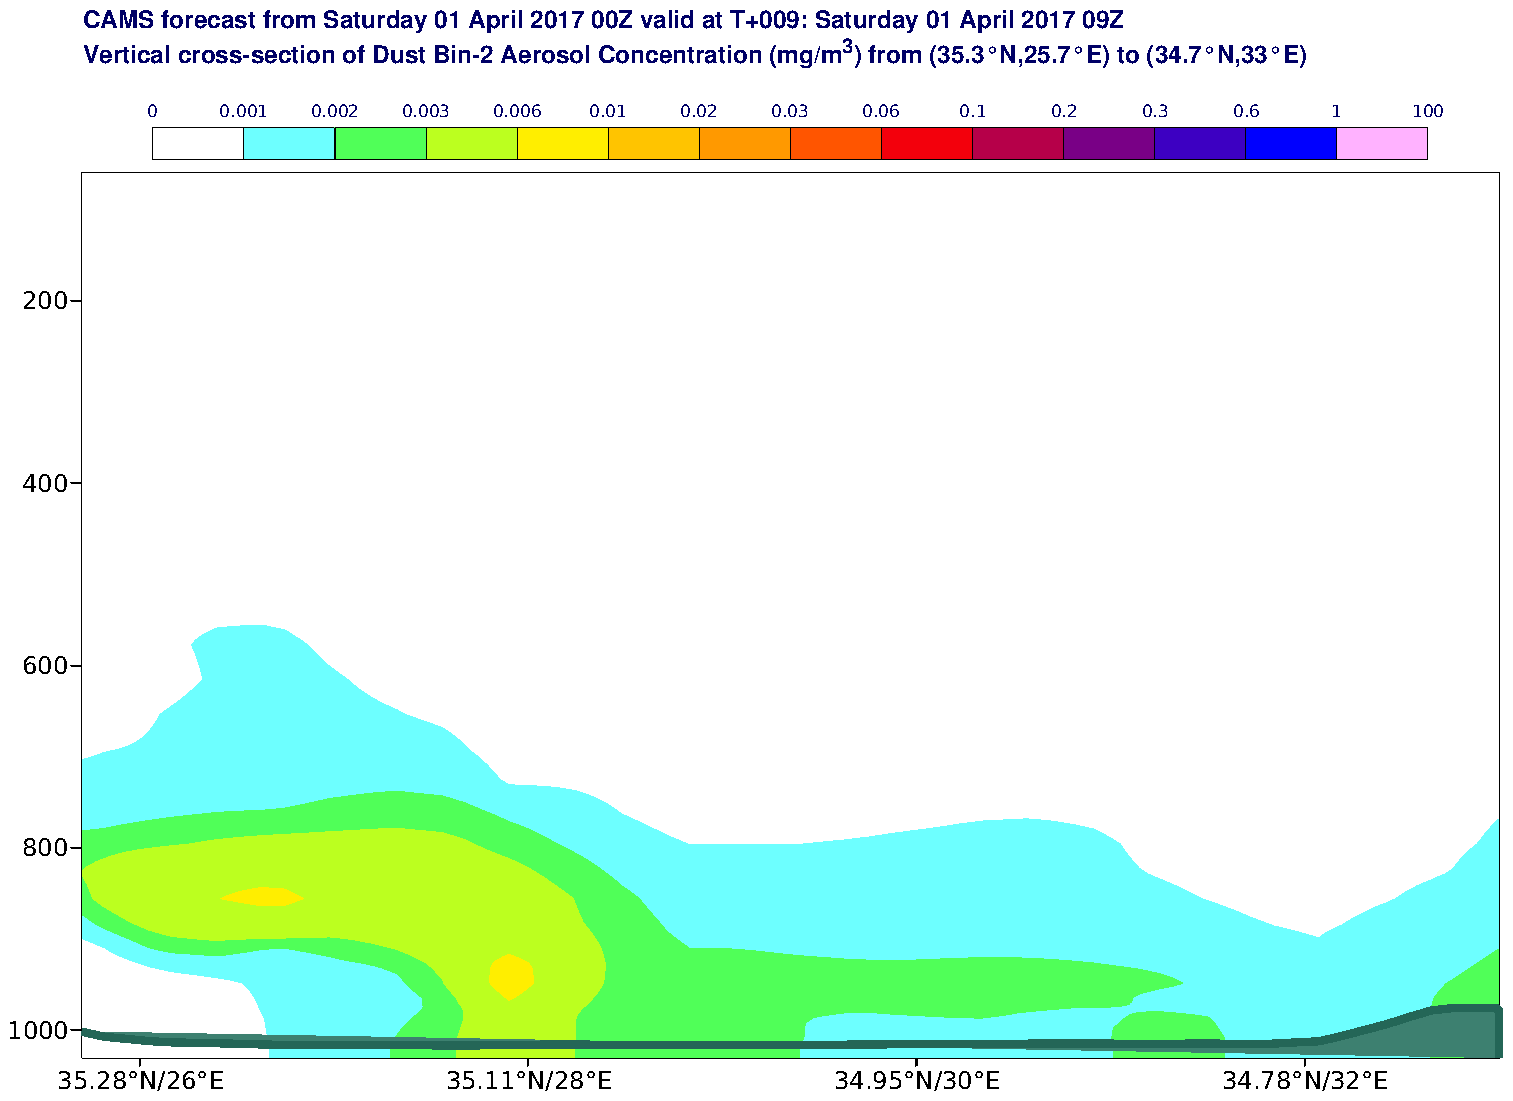 Vertical cross-section of Dust Bin-2 Aerosol Concentration (mg/m3) valid at T9 - 2017-04-01 09:00